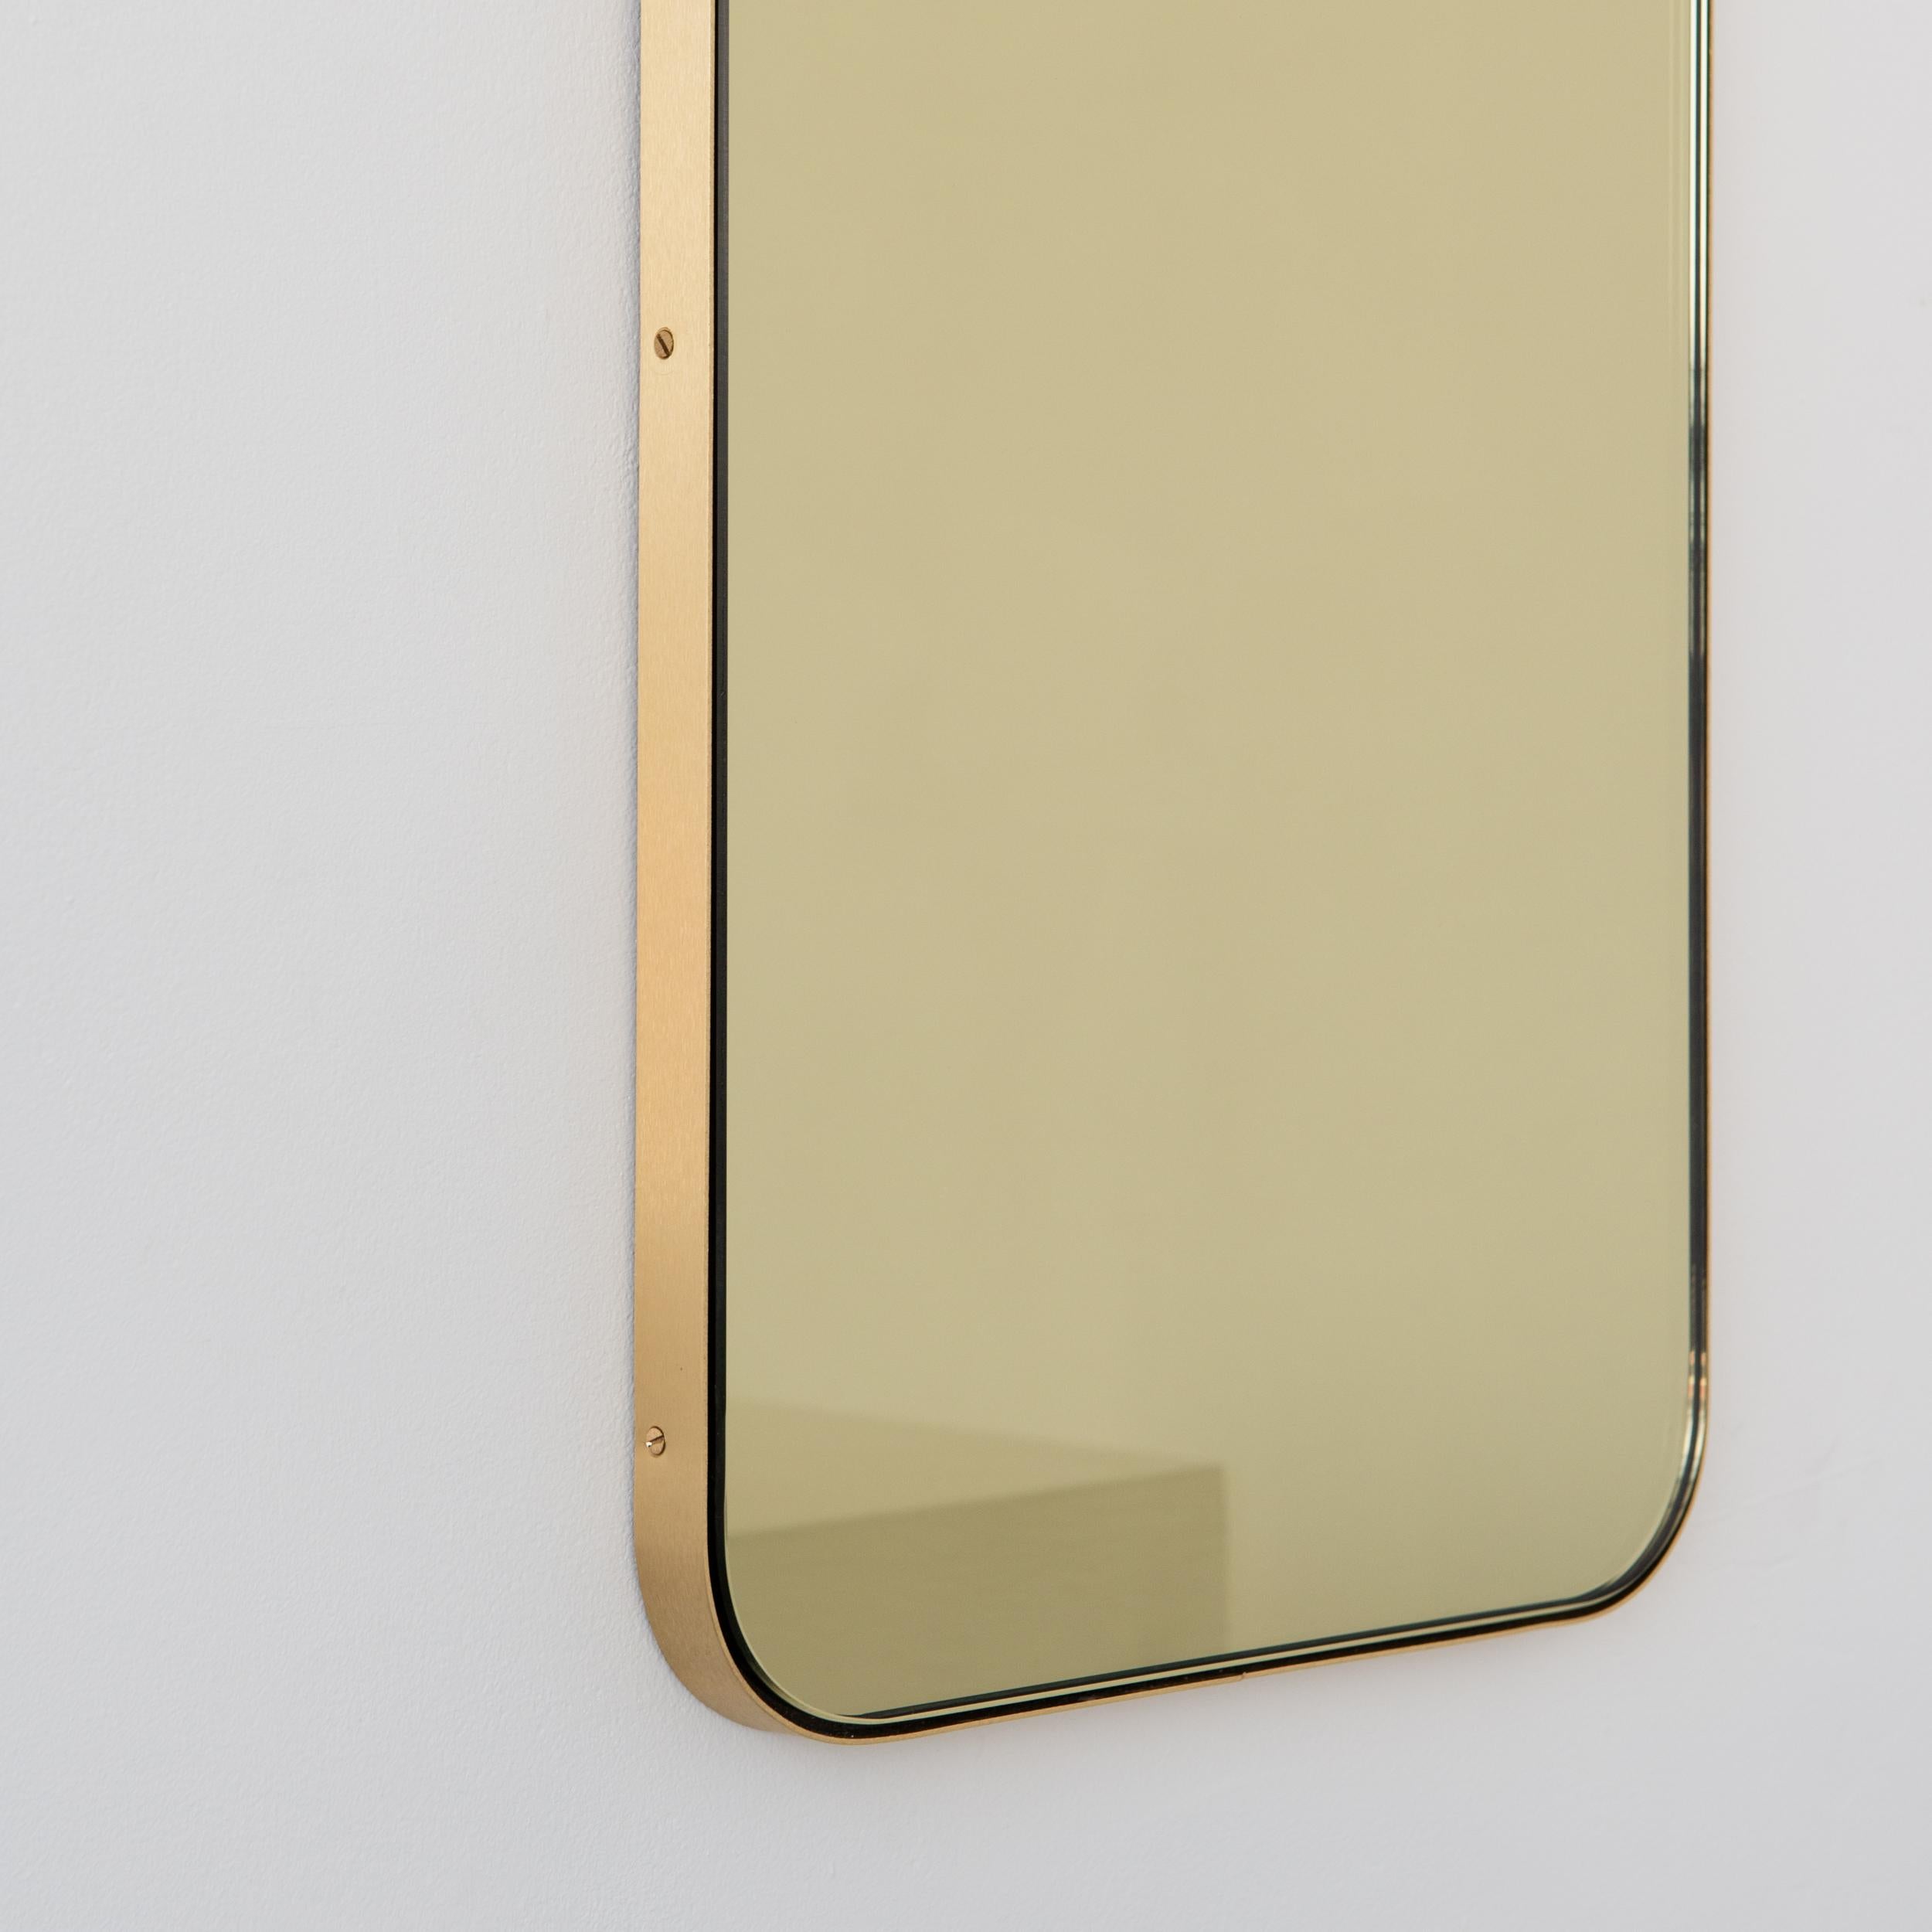 In Stock Quadris Gold Tinted Rectangular Mirror, Brass Frame, Small In New Condition For Sale In London, GB